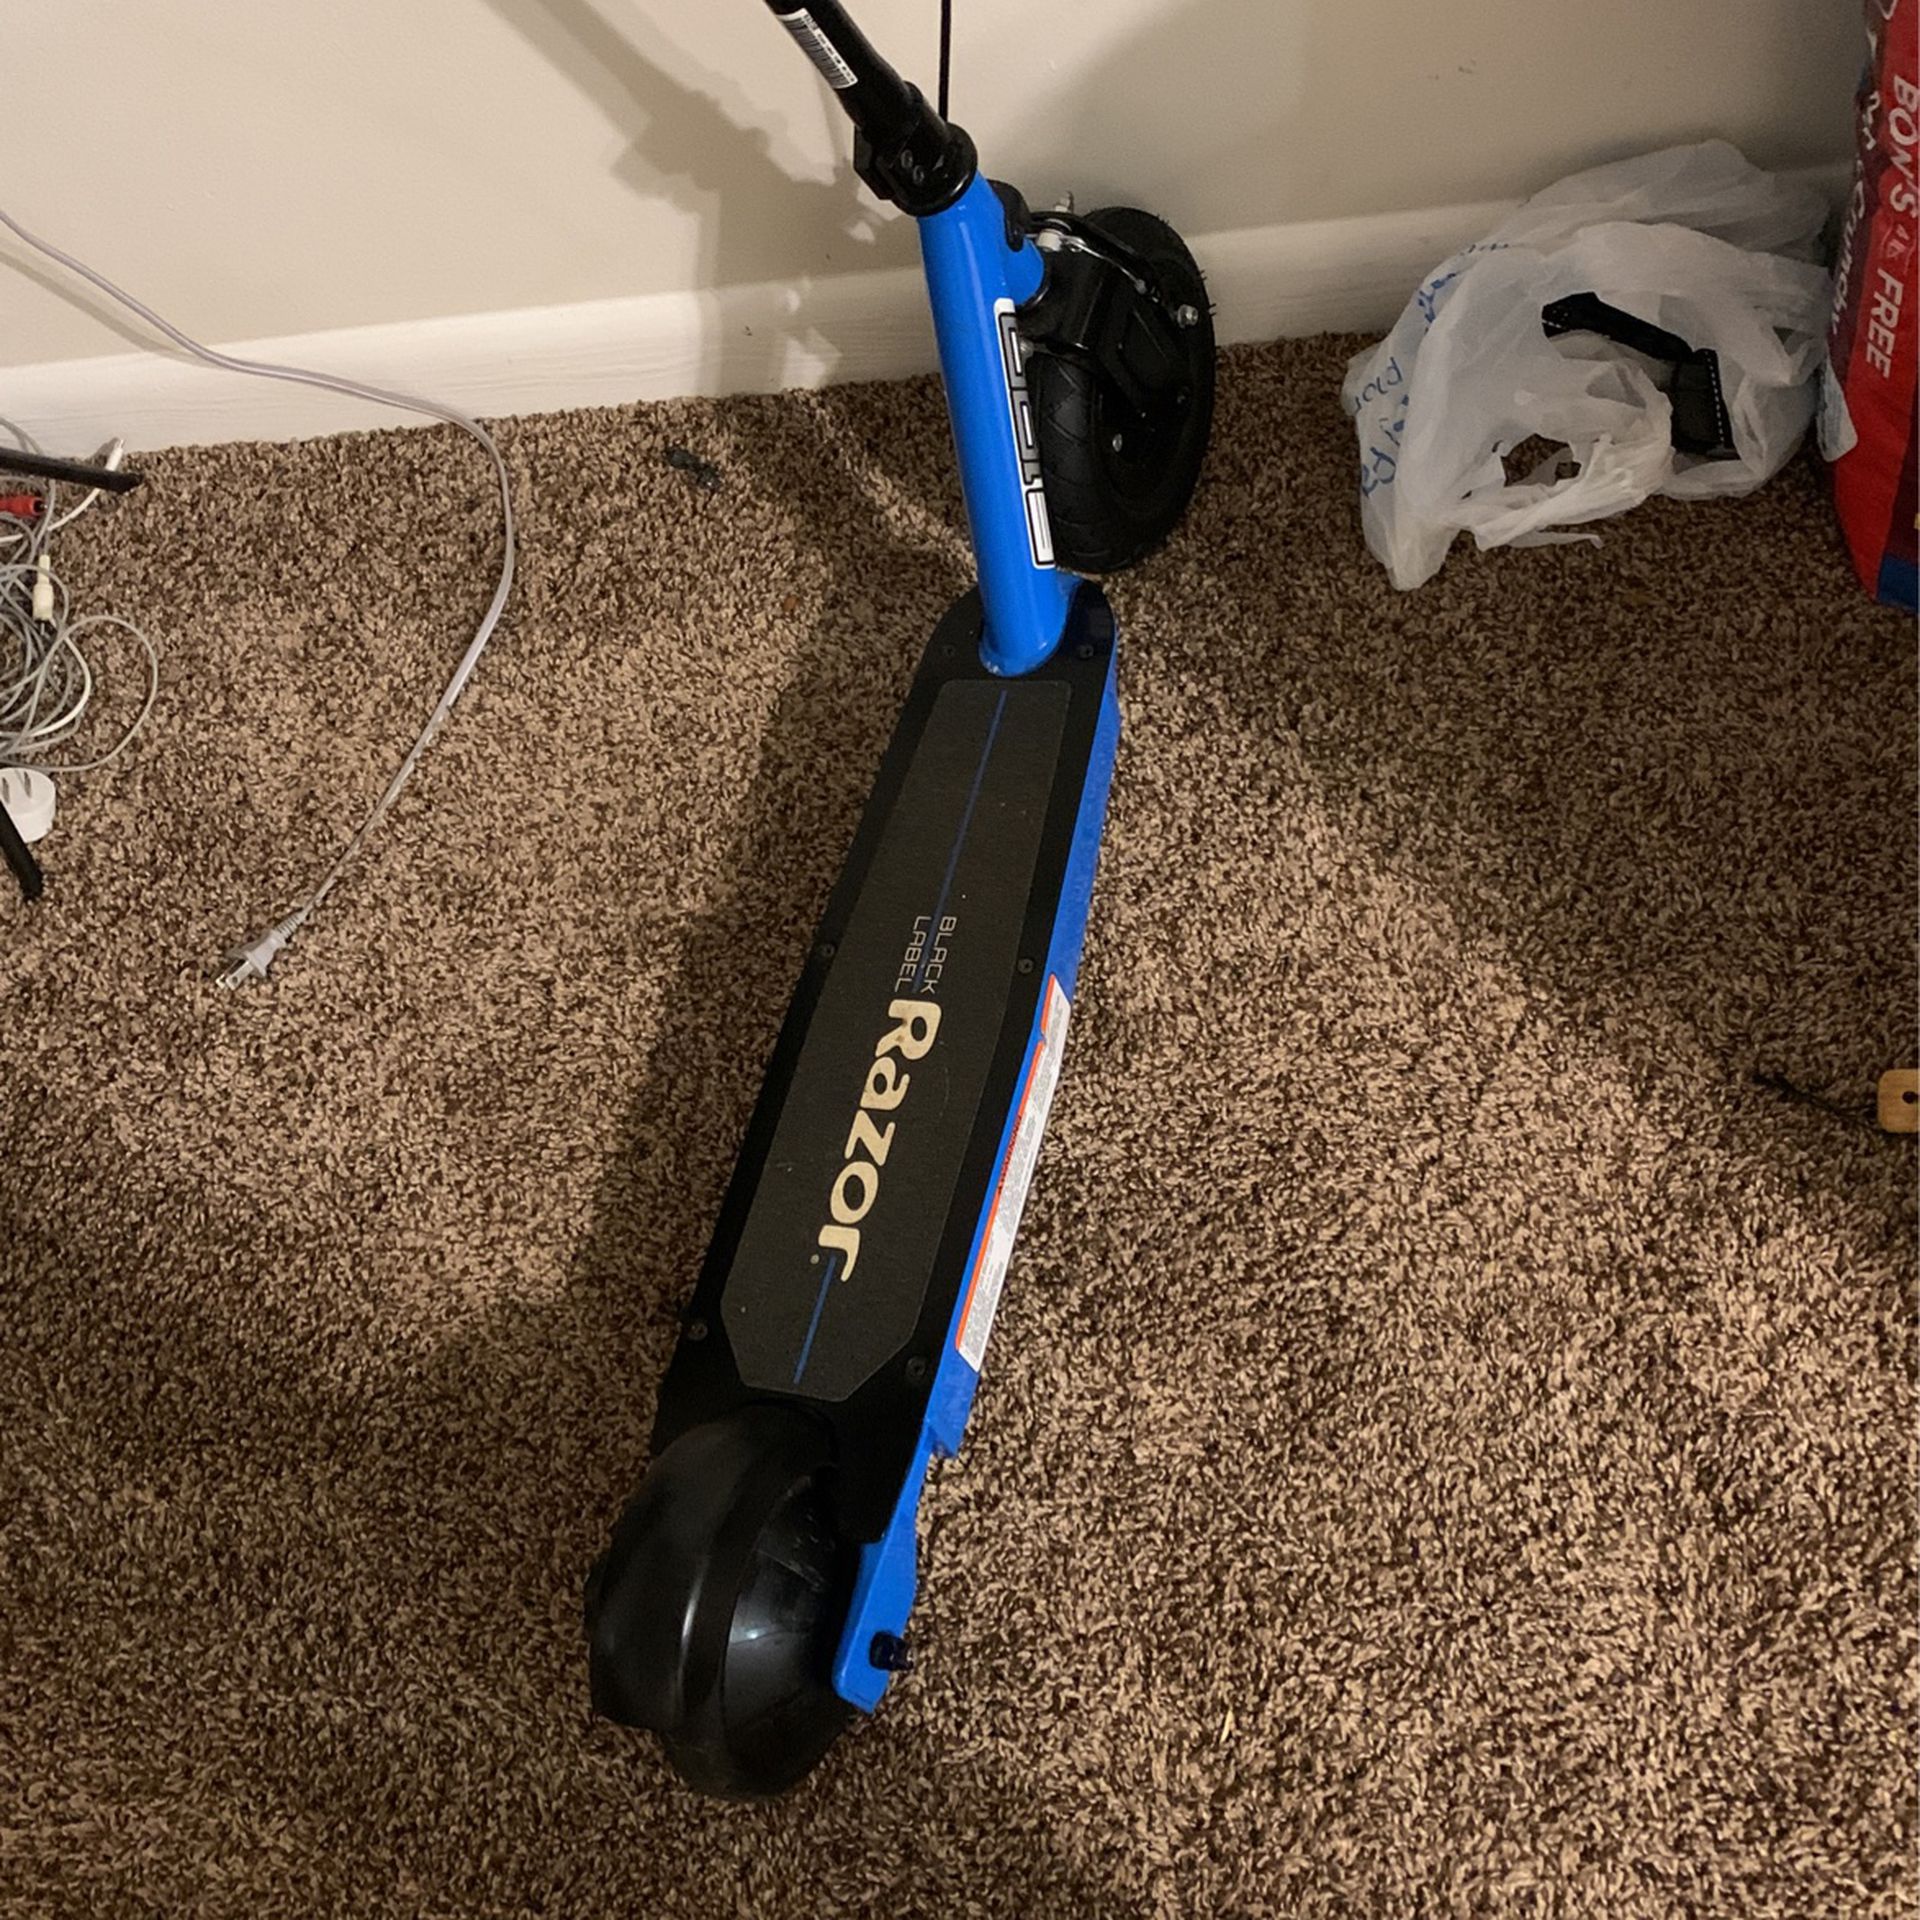  Black Label E100 Electric Scooter  4.3   (19) Write a review $144.99 Ages 8 and up  Max Weight 120 lb. Max Speed 10 mph  Battery Life Up to 35 minute